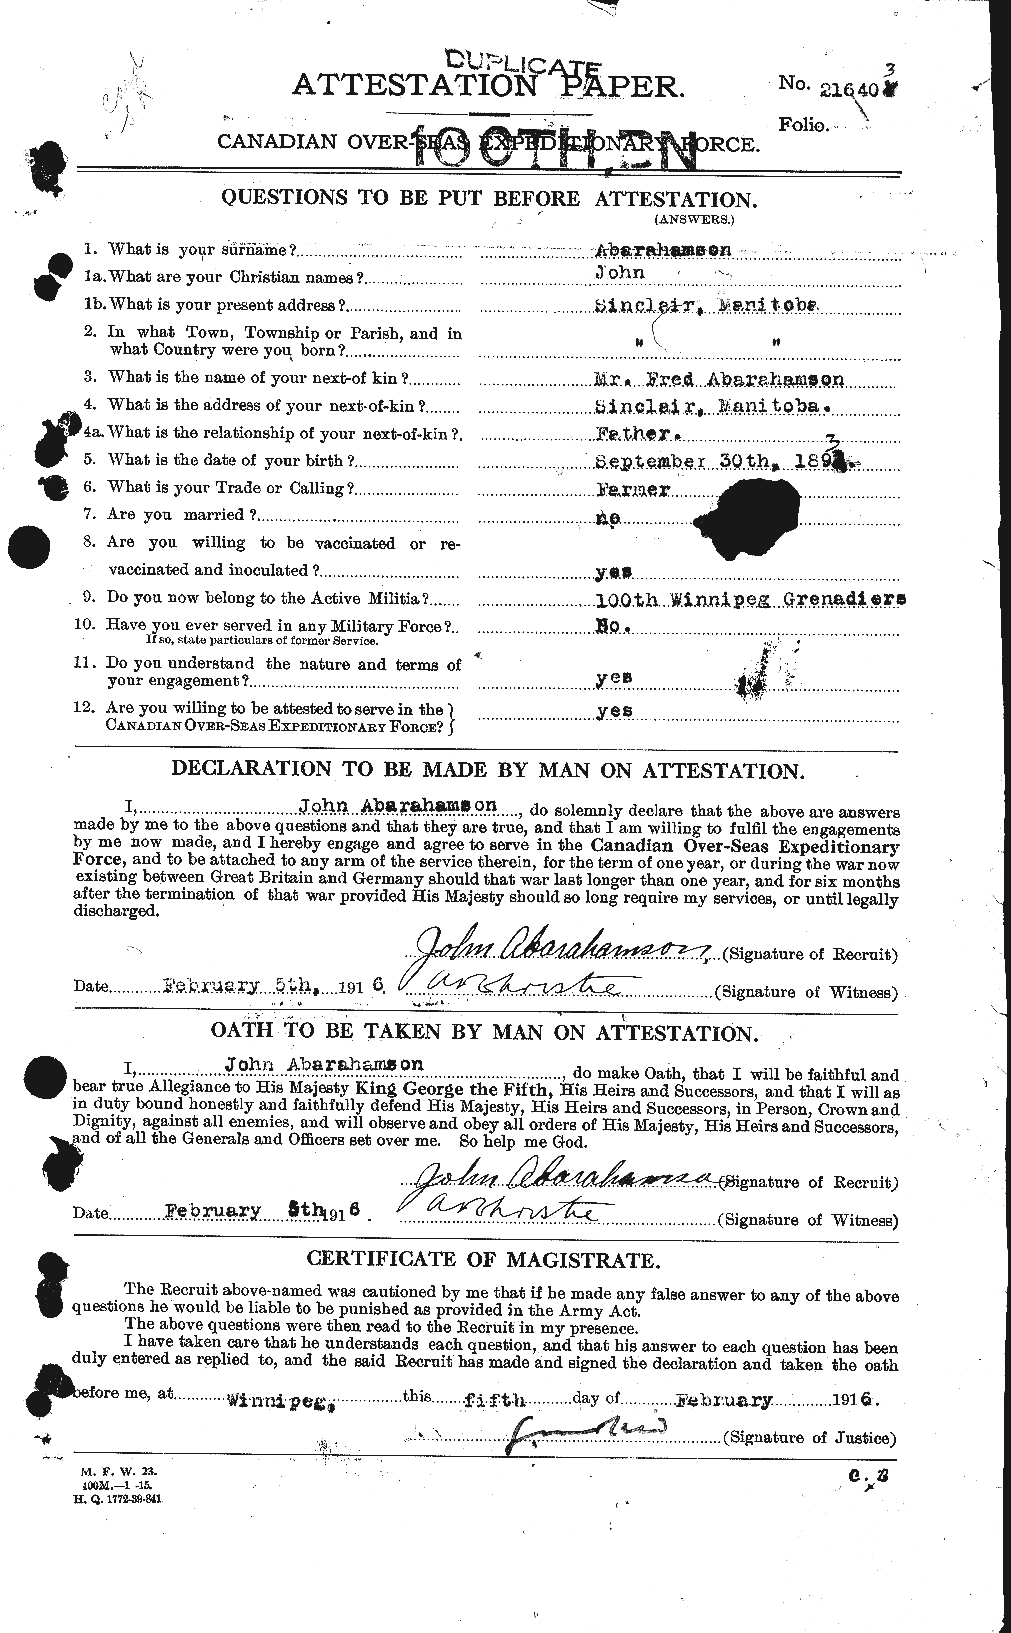 Personnel Records of the First World War - CEF 200760a